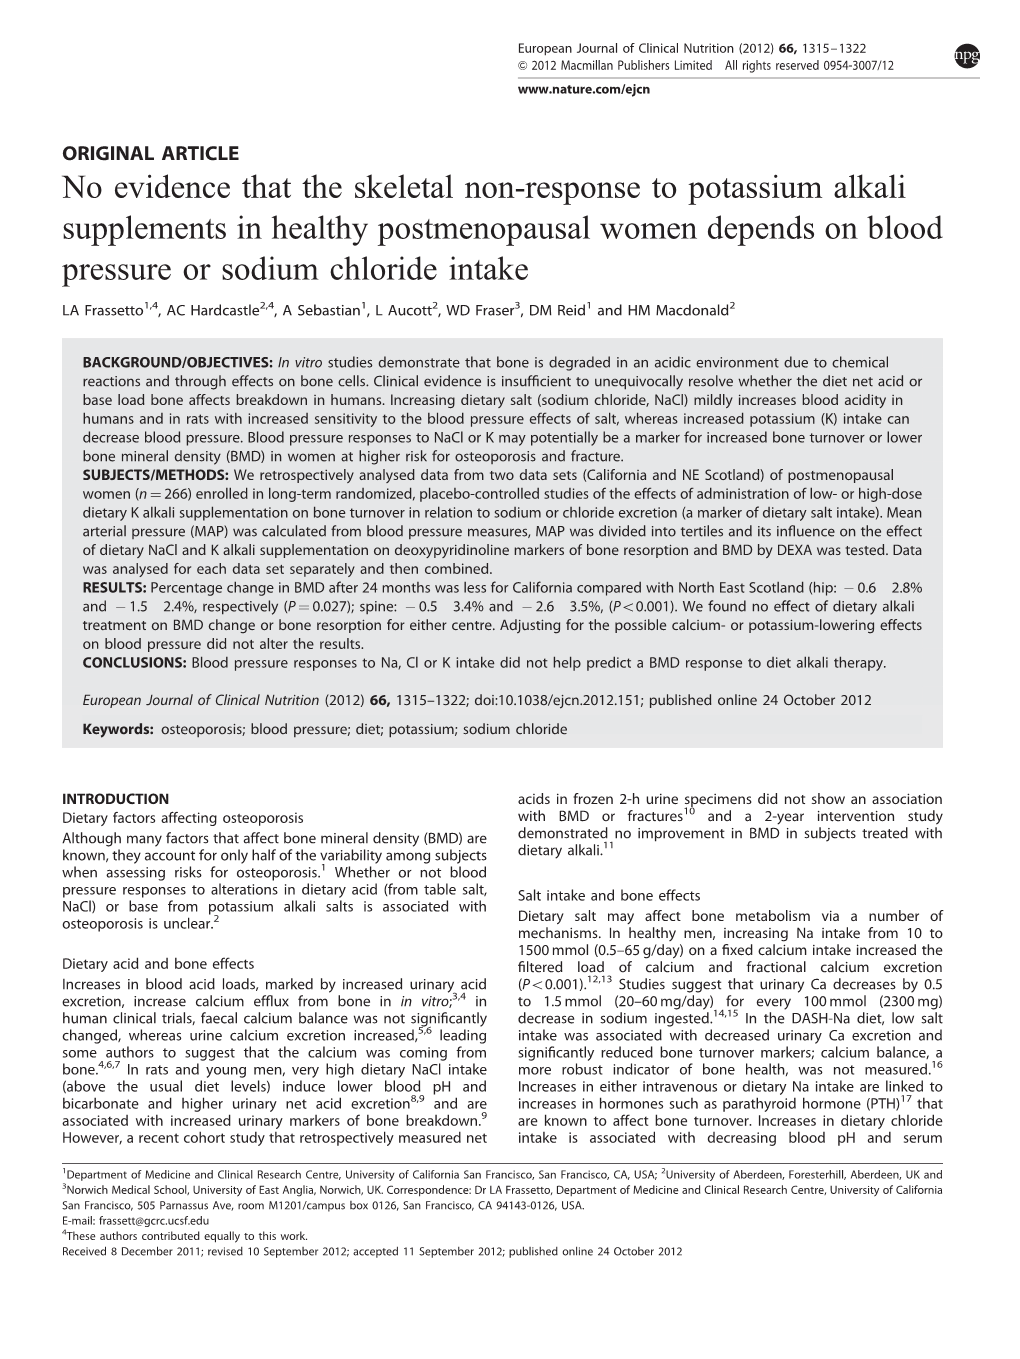 No Evidence That the Skeletal Non-Response to Potassium Alkali Supplements in Healthy Postmenopausal Women Depends on Blood Pressure Or Sodium Chloride Intake